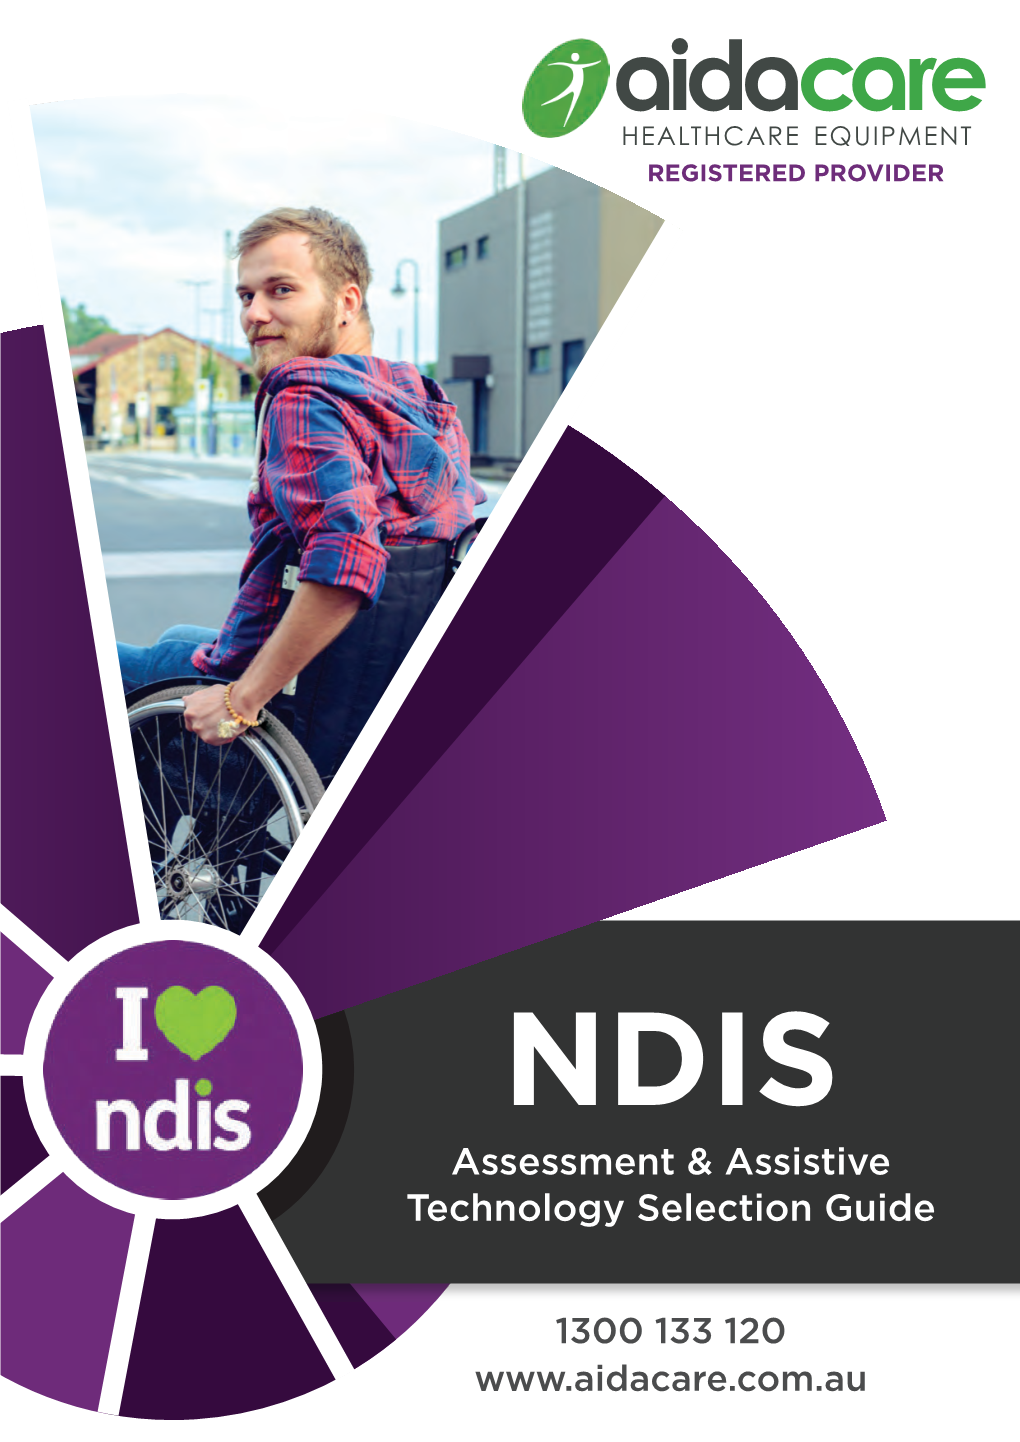 Assessment & Assistive Technology Selection Guide